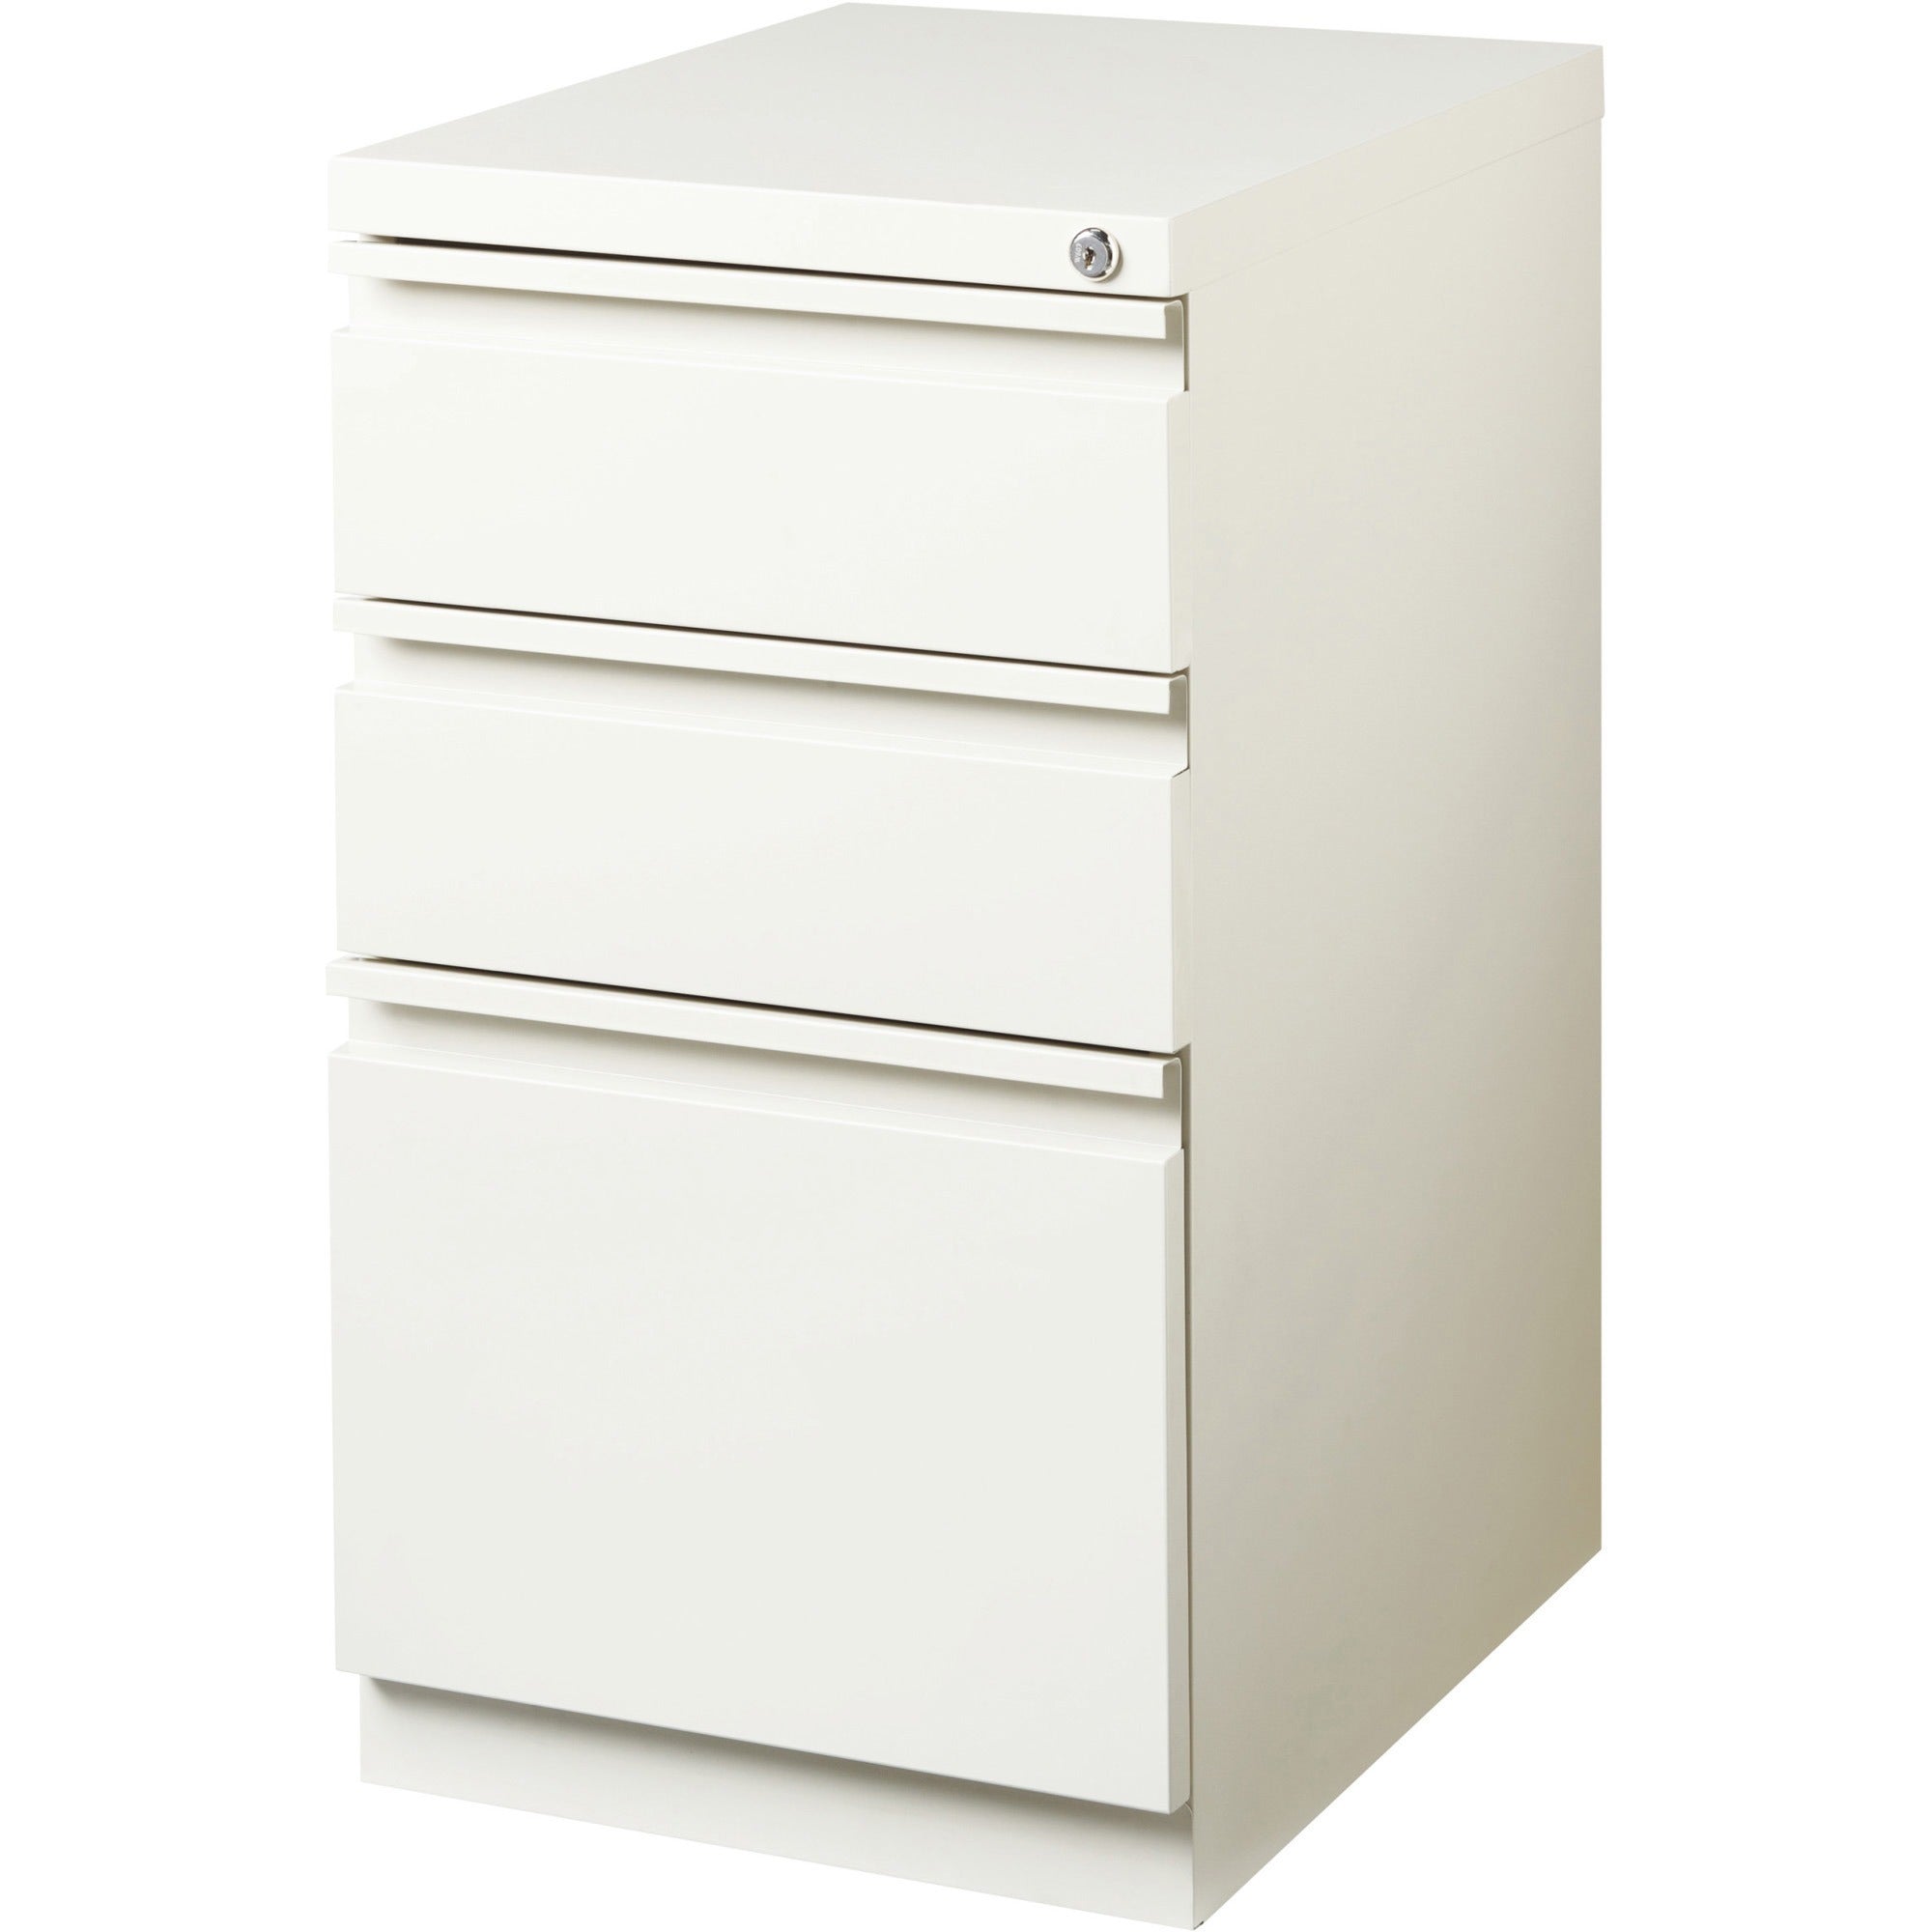 lorell-20-box-box-file-mobile-file-cabinet-with-full-width-pull-15-x-199-x-278-for-box-file-letter-vertical-mobility-ball-bearing-suspension-removable-lock-pull-out-drawer-recessed-drawer-casters-key-lock-white-powder-coated_llr00049 - 4